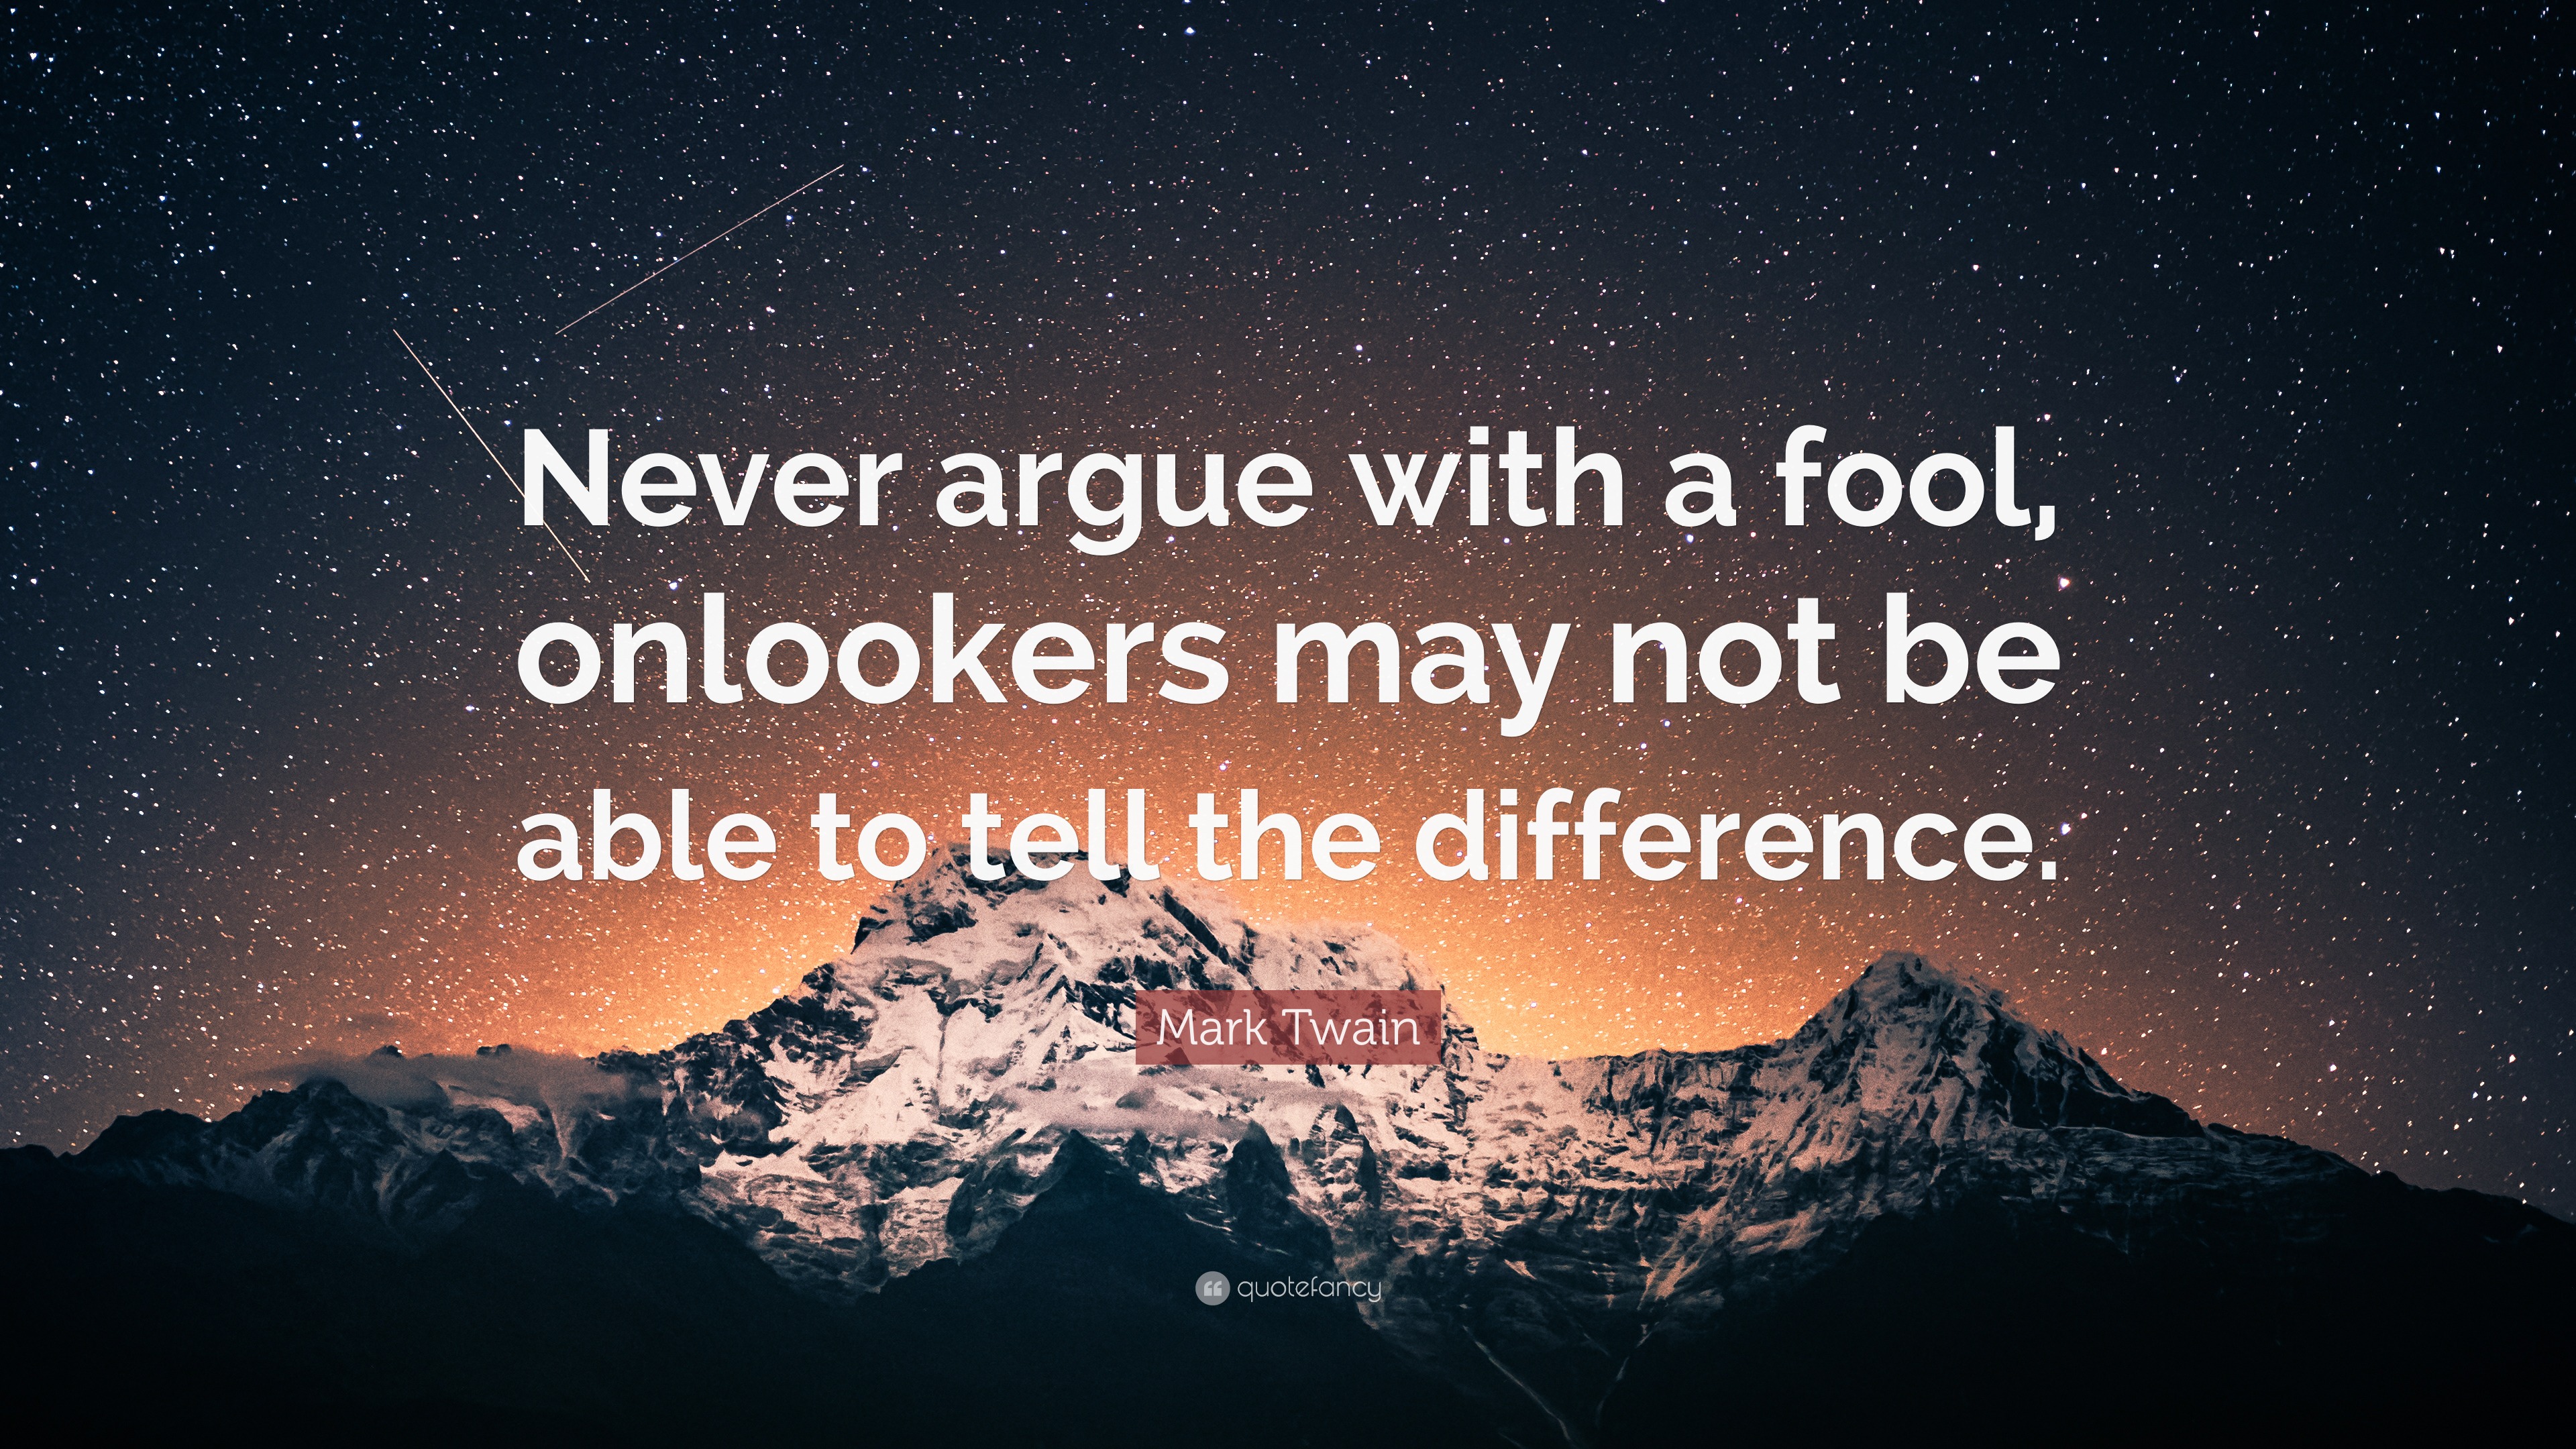 Mark Twain Quote: “Never argue with a fool, onlookers may not be able